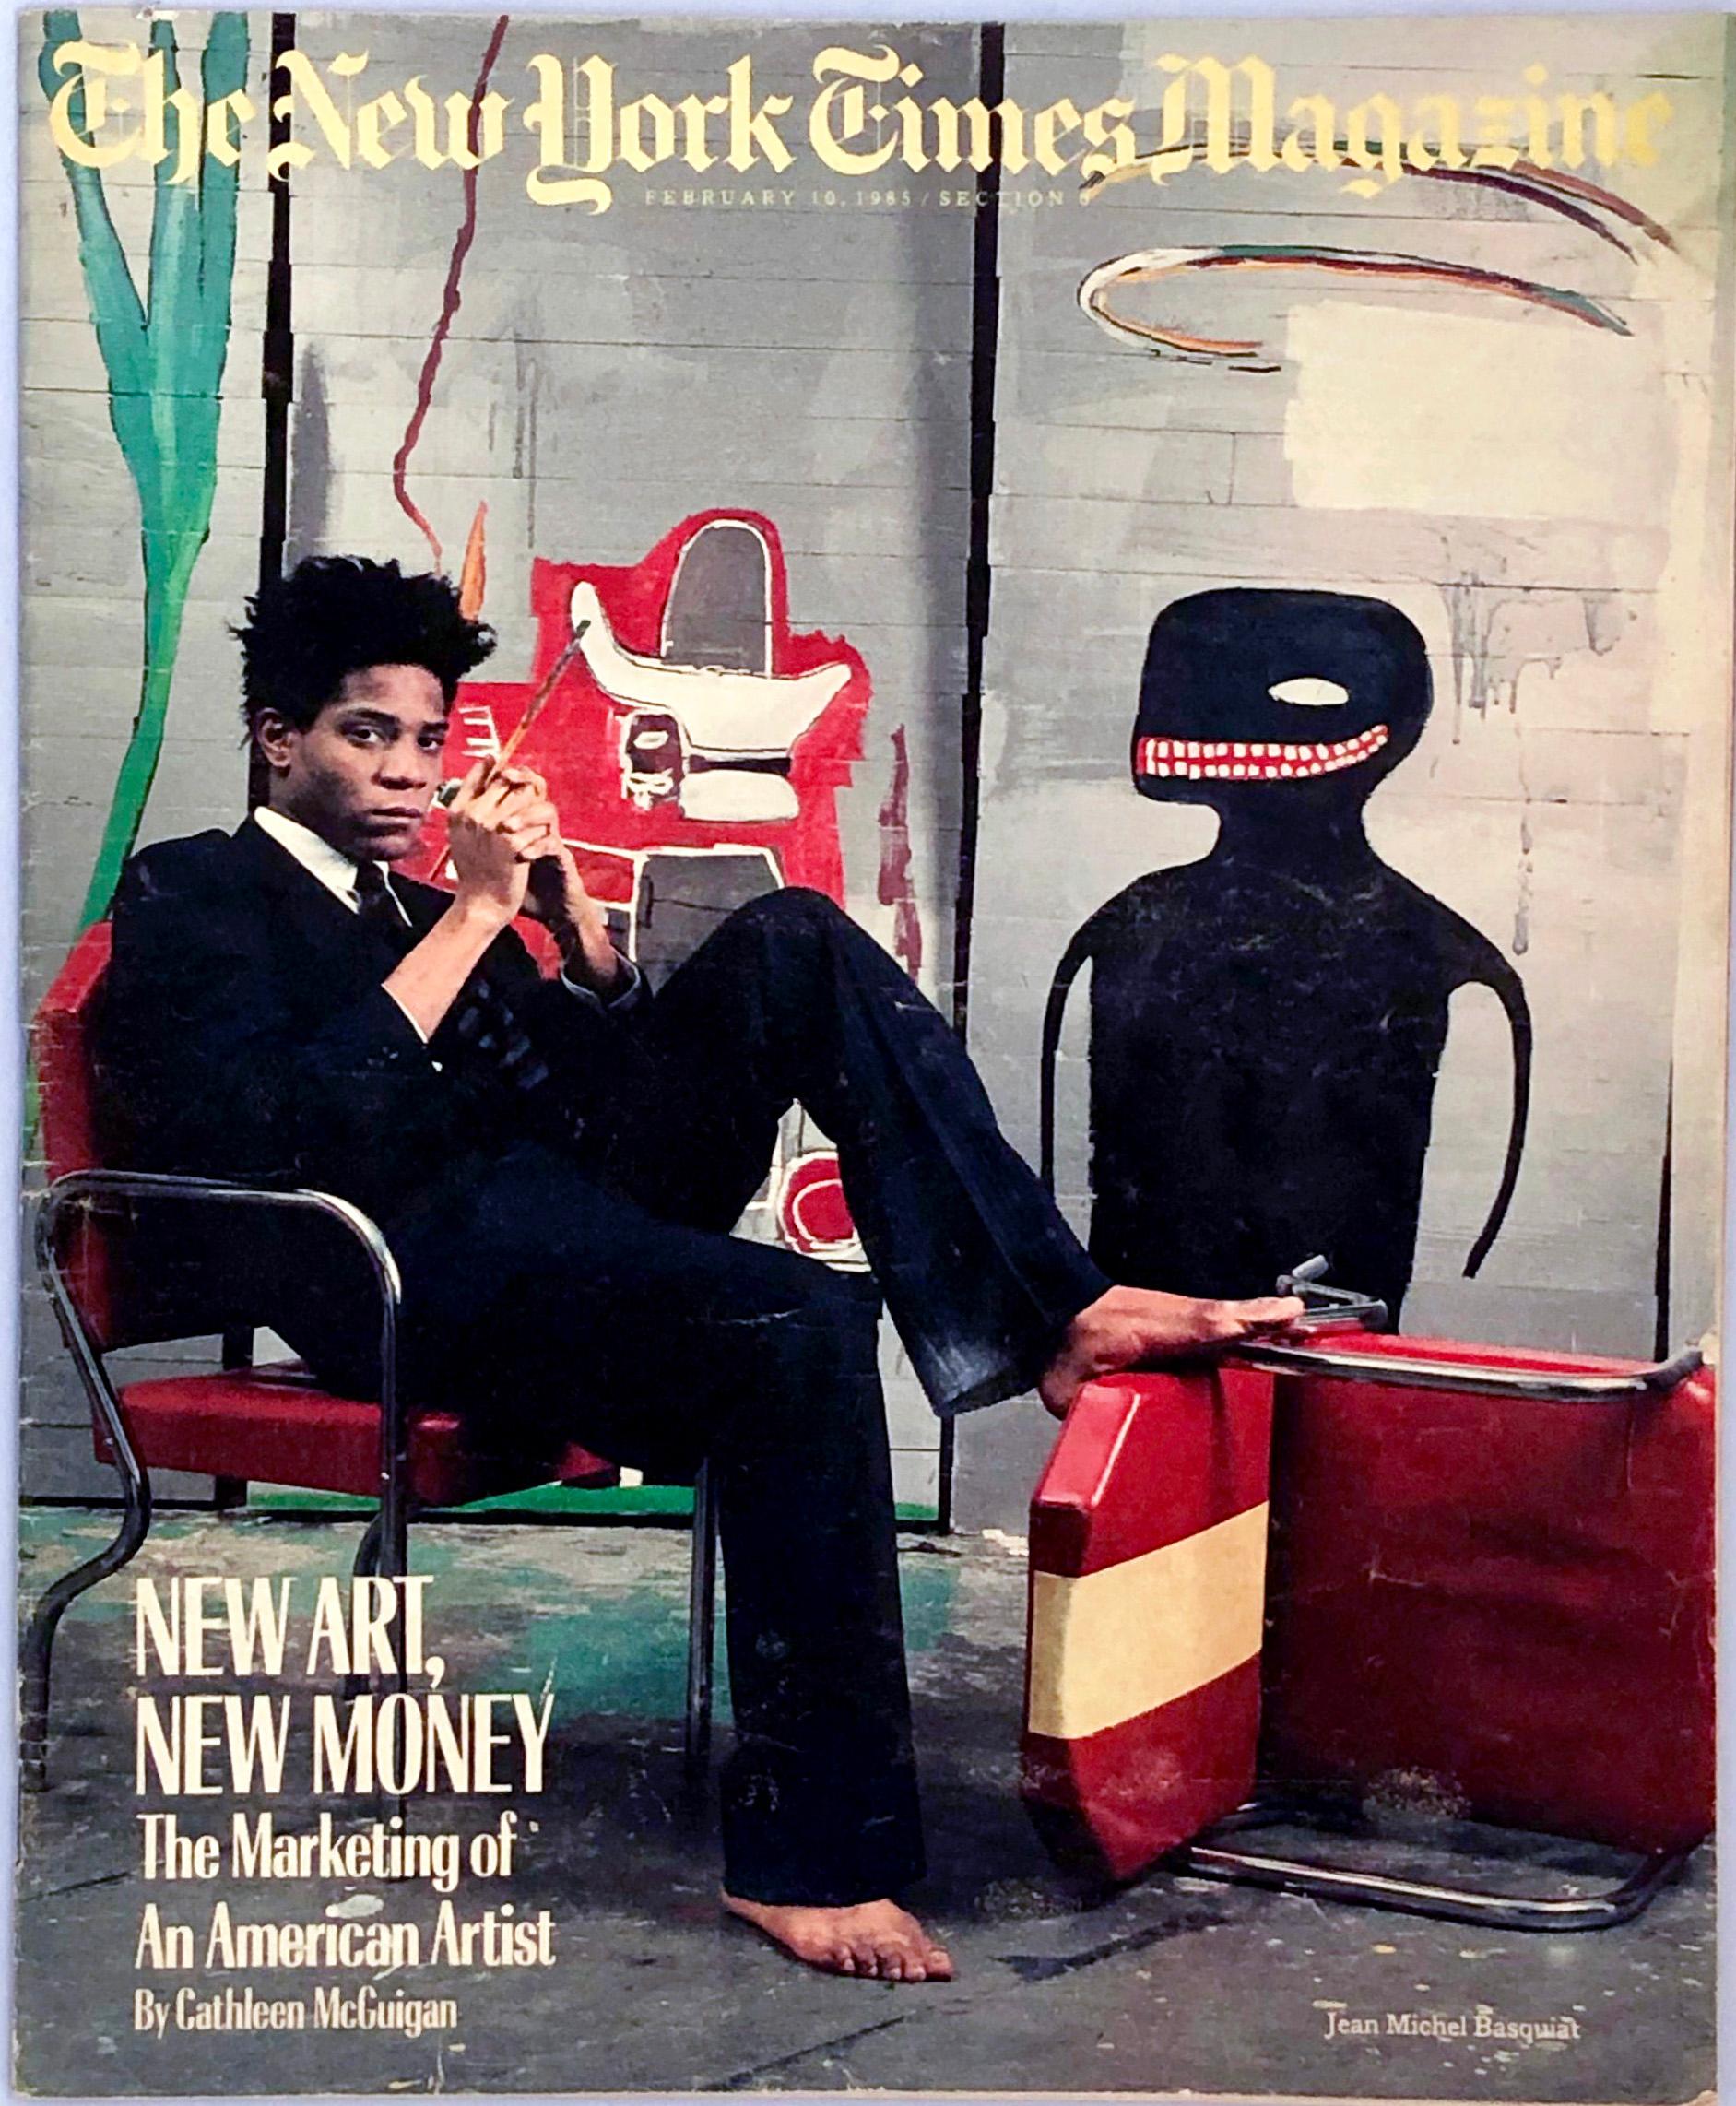 Basquiat, The New York Times Magazine 1985 - Print by after Jean-Michel Basquiat